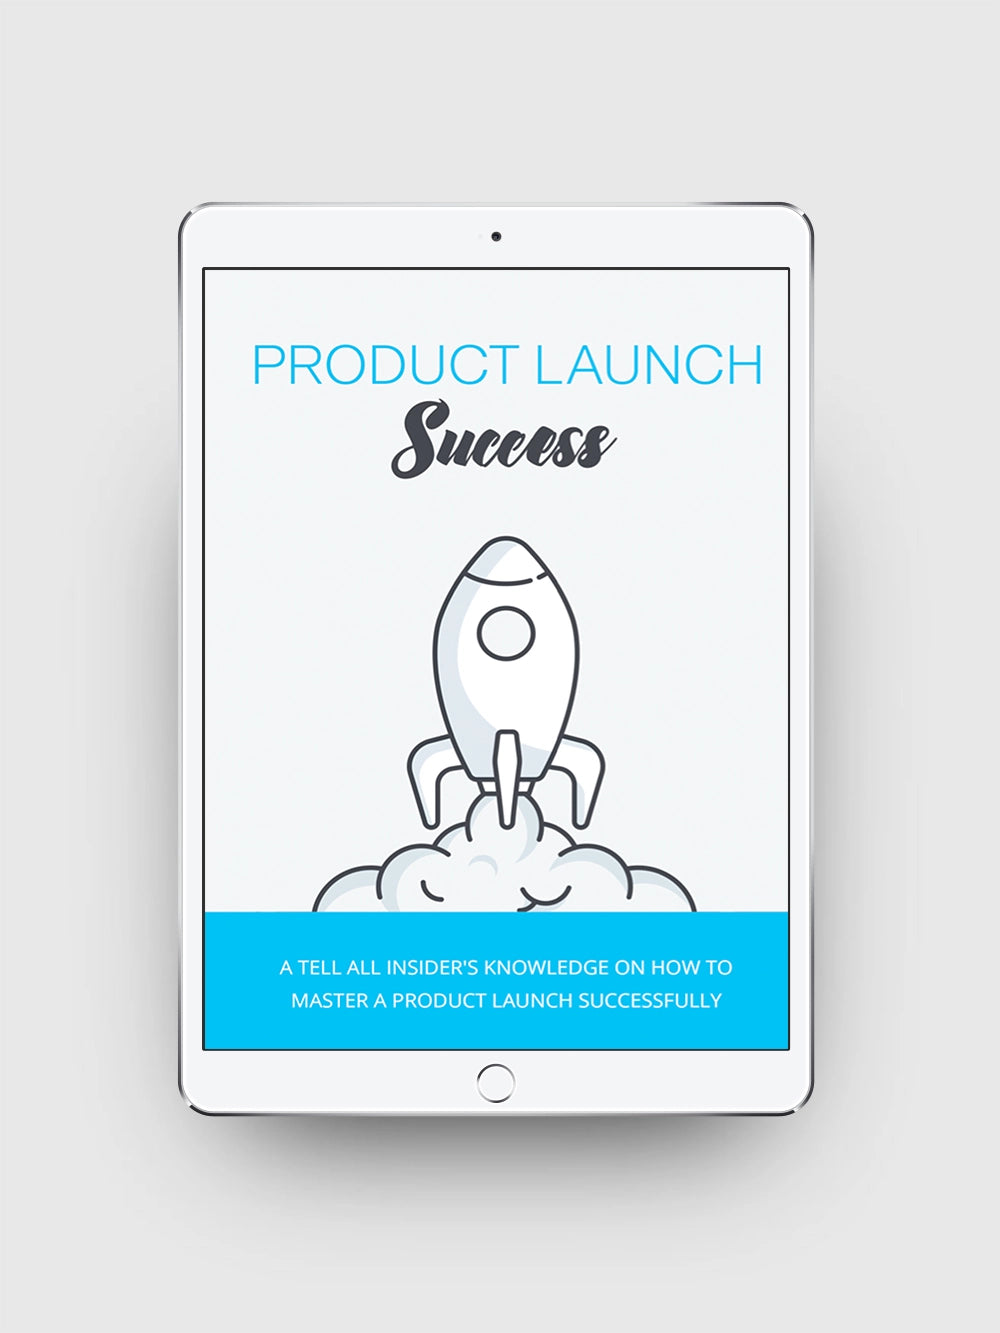 Successful Product Launch